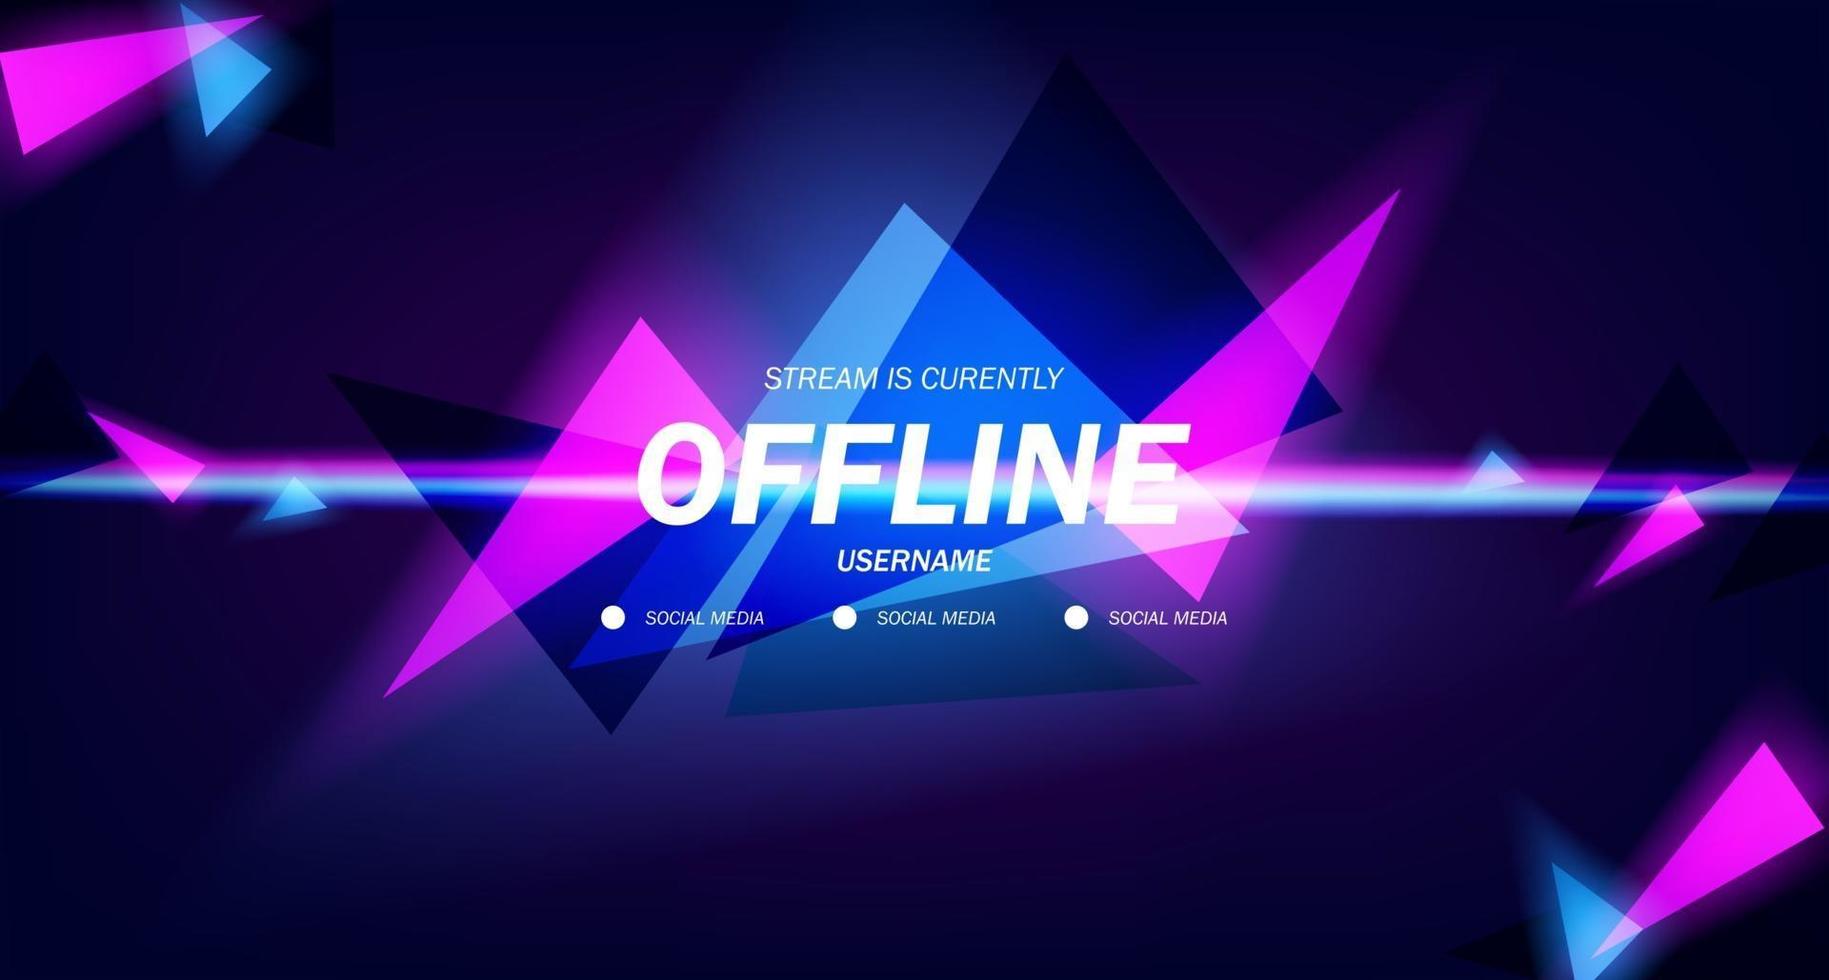 modern background screensaver offline stream gaming background with neon pink and cyan color glowing triangles vector